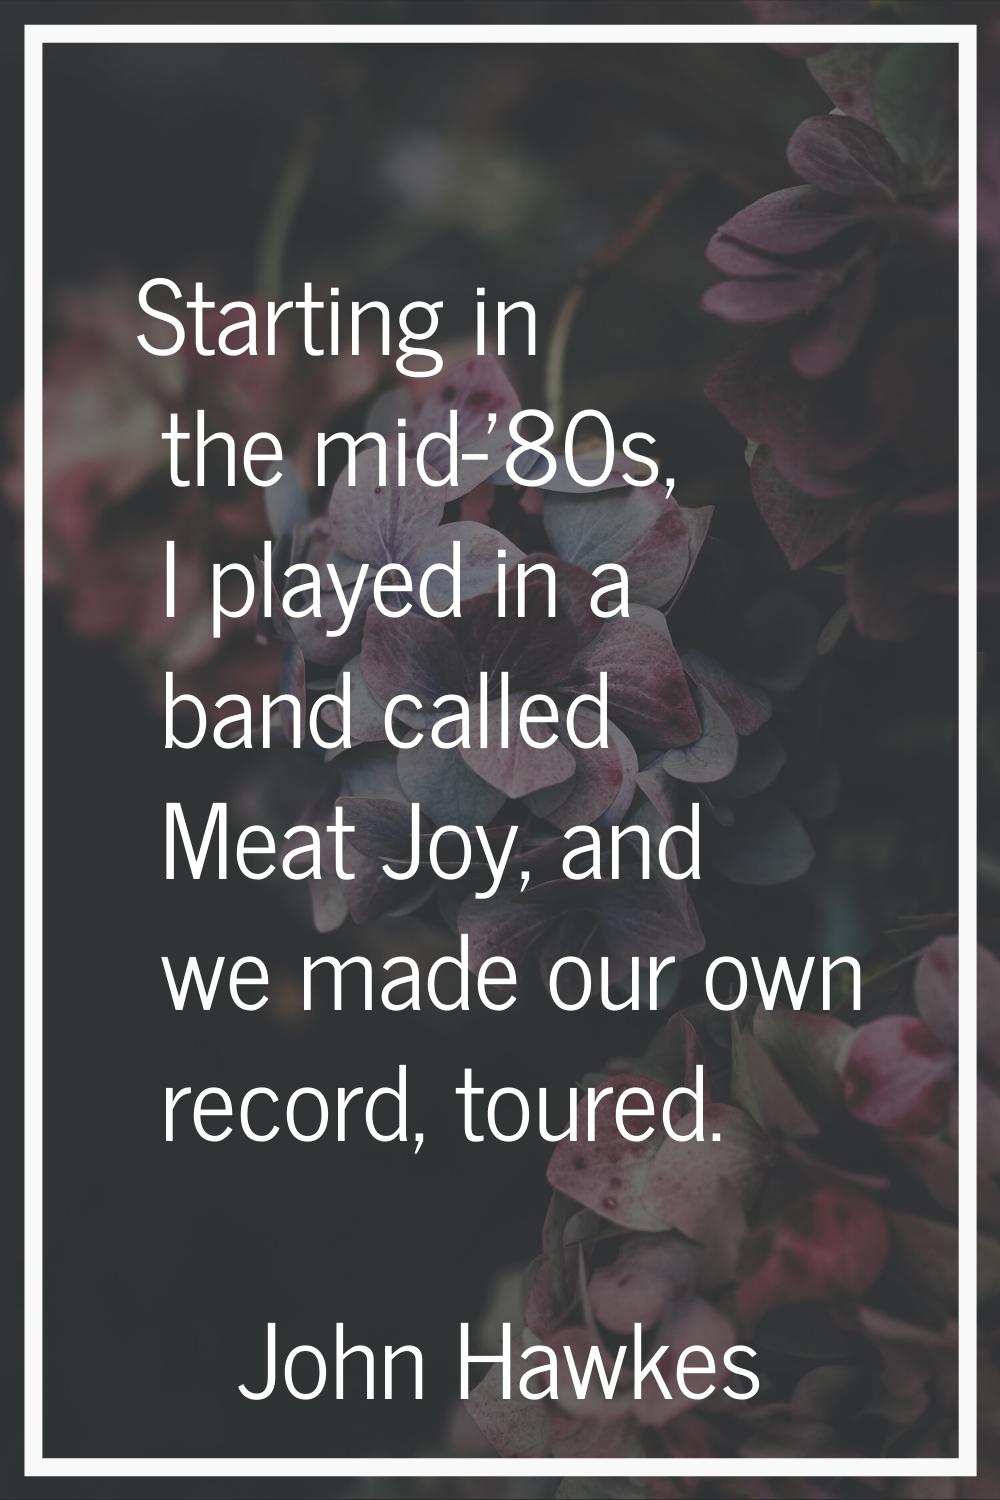 Starting in the mid-'80s, I played in a band called Meat Joy, and we made our own record, toured.